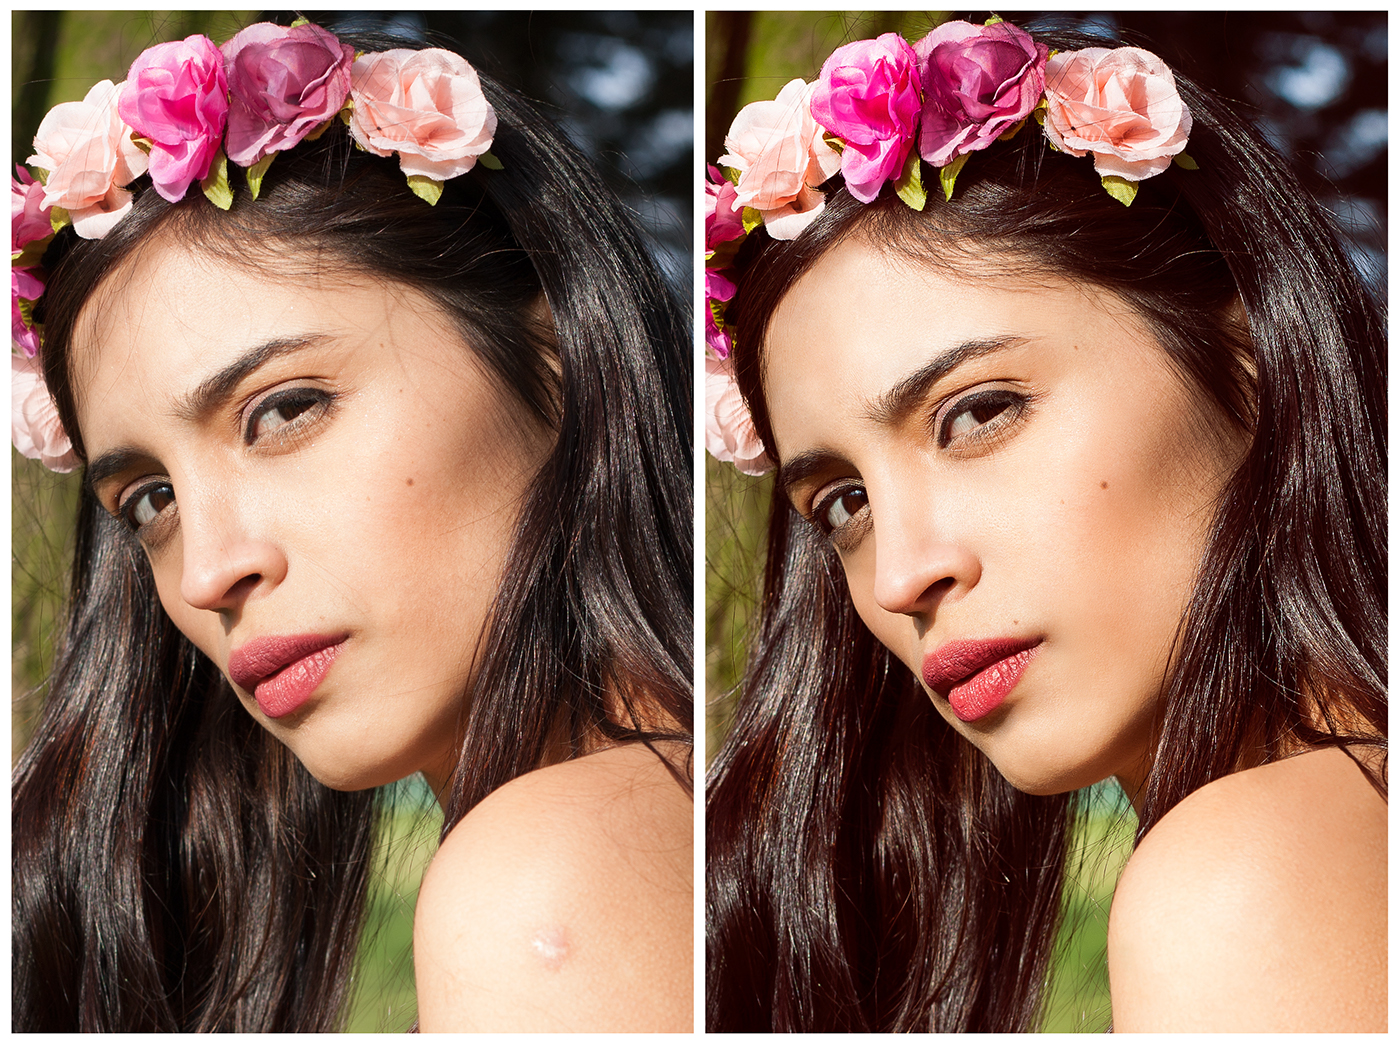 latina model modeling fashionspring flower girl woman sexy naked color america retouch highend photoshop portrait